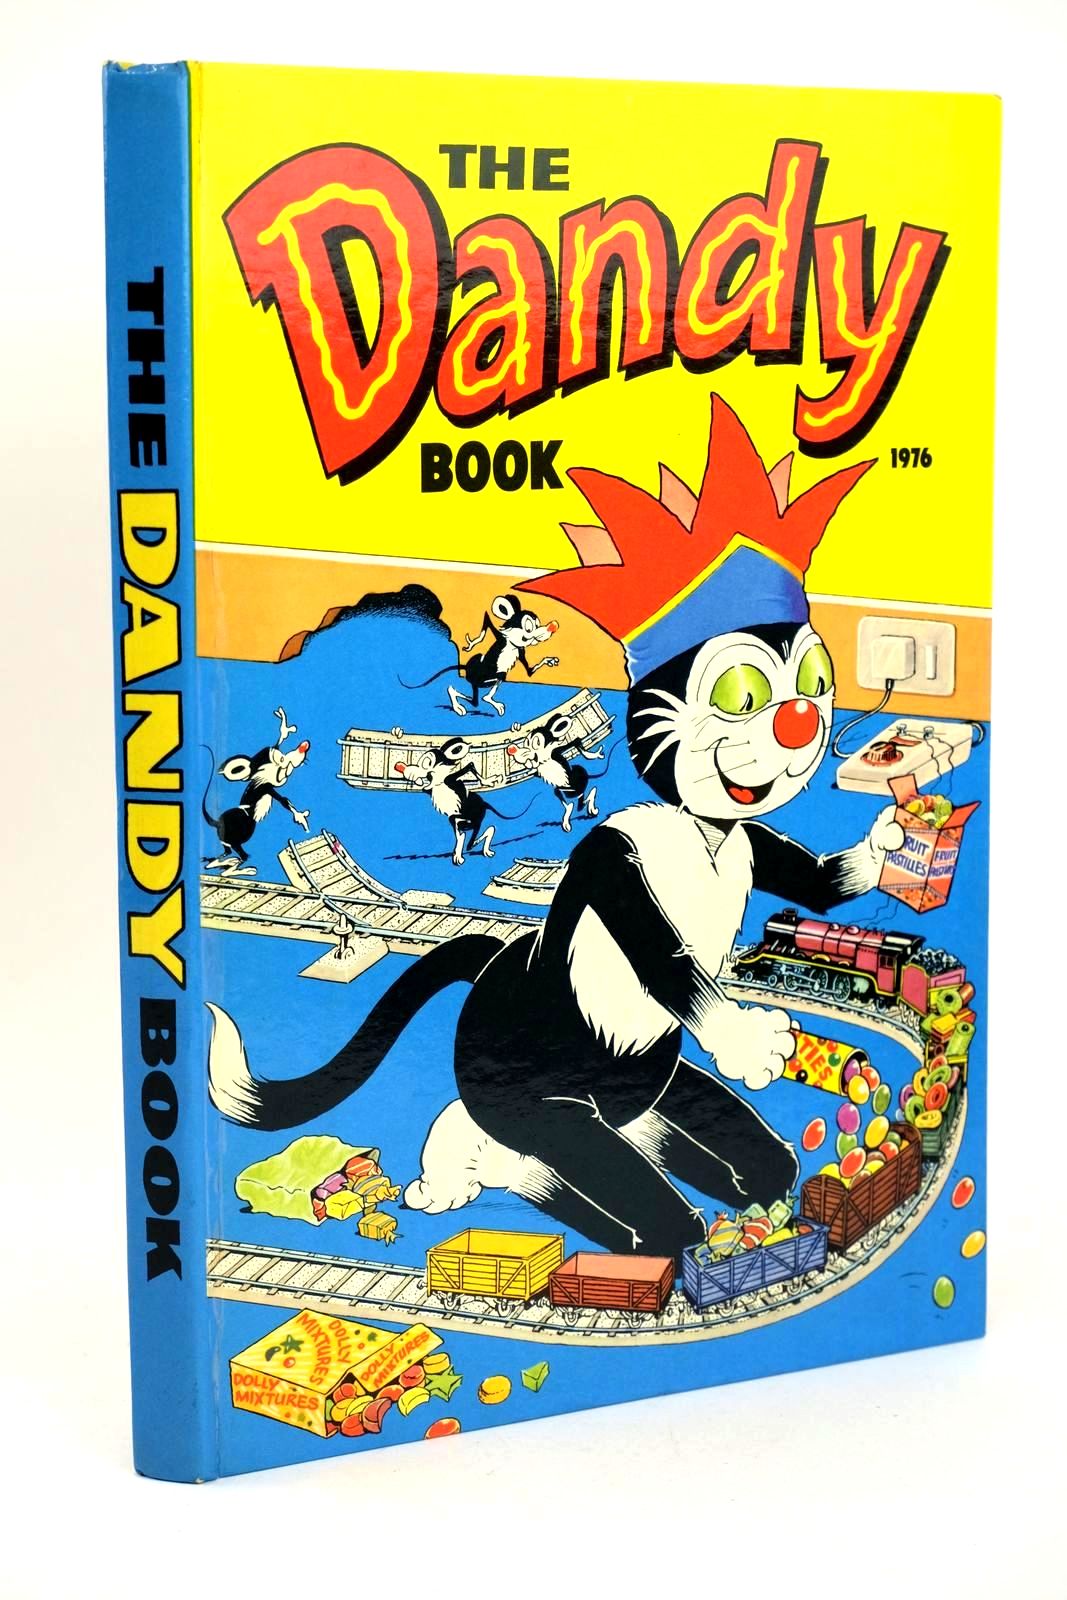 Photo of THE DANDY BOOK 1976 published by D.C. Thomson &amp; Co Ltd. (STOCK CODE: 1318548)  for sale by Stella & Rose's Books